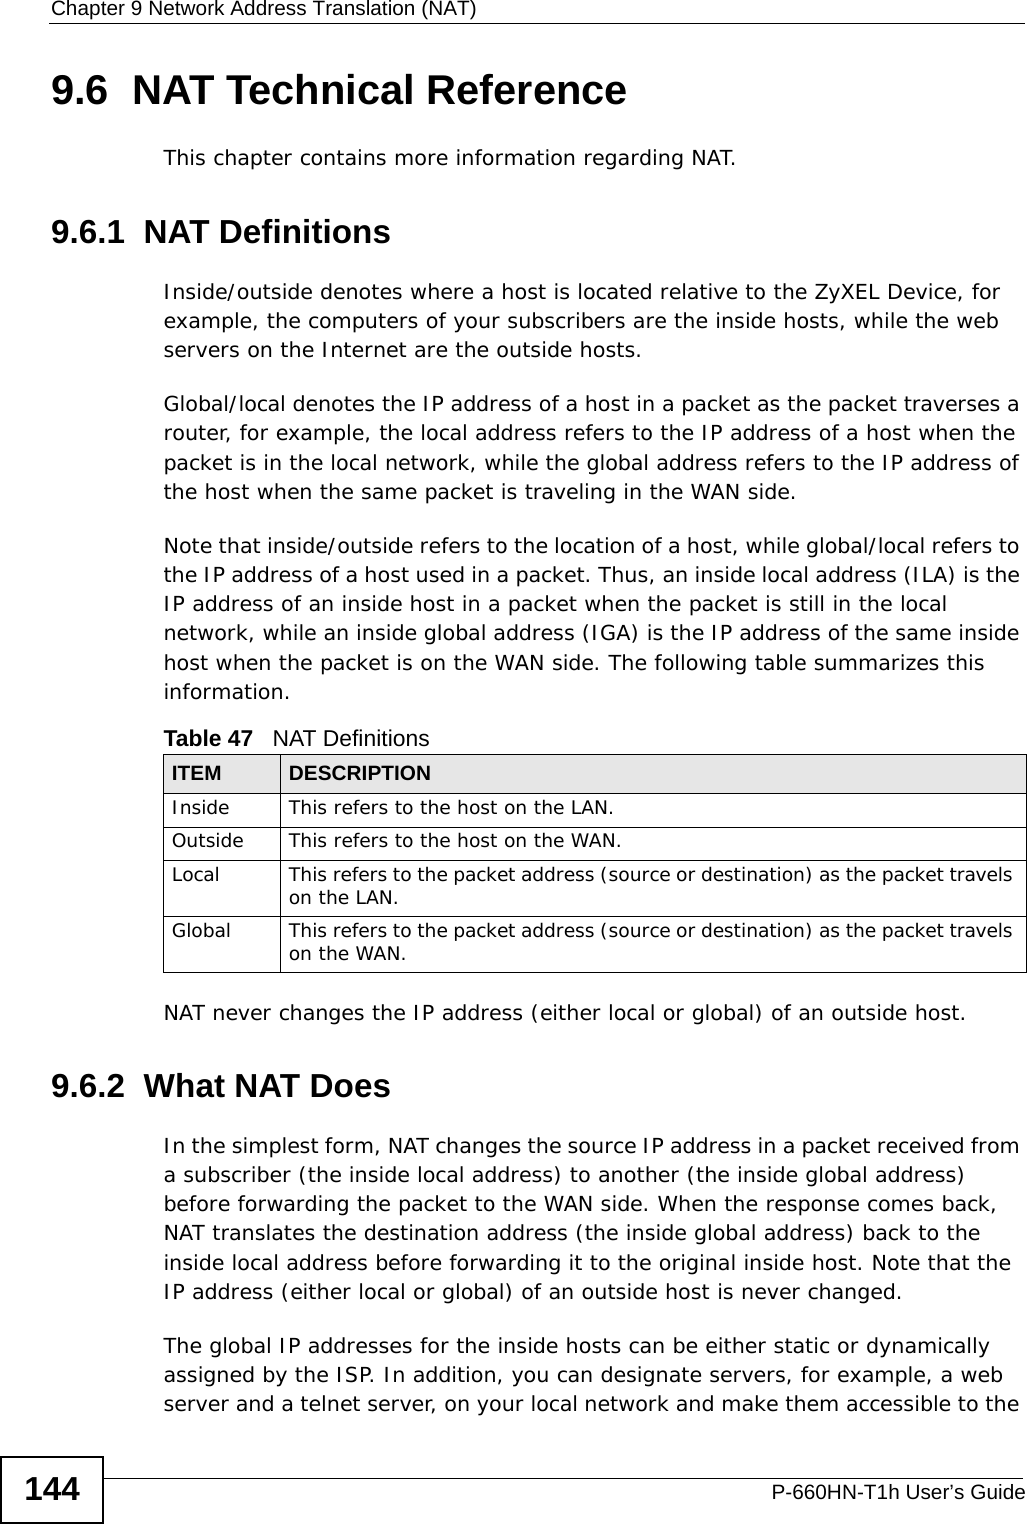 Chapter 9 Network Address Translation (NAT)P-660HN-T1h User’s Guide1449.6  NAT Technical ReferenceThis chapter contains more information regarding NAT.9.6.1  NAT DefinitionsInside/outside denotes where a host is located relative to the ZyXEL Device, for example, the computers of your subscribers are the inside hosts, while the web servers on the Internet are the outside hosts. Global/local denotes the IP address of a host in a packet as the packet traverses a router, for example, the local address refers to the IP address of a host when the packet is in the local network, while the global address refers to the IP address of the host when the same packet is traveling in the WAN side. Note that inside/outside refers to the location of a host, while global/local refers to the IP address of a host used in a packet. Thus, an inside local address (ILA) is the IP address of an inside host in a packet when the packet is still in the local network, while an inside global address (IGA) is the IP address of the same inside host when the packet is on the WAN side. The following table summarizes this information.NAT never changes the IP address (either local or global) of an outside host.9.6.2  What NAT DoesIn the simplest form, NAT changes the source IP address in a packet received from a subscriber (the inside local address) to another (the inside global address) before forwarding the packet to the WAN side. When the response comes back, NAT translates the destination address (the inside global address) back to the inside local address before forwarding it to the original inside host. Note that the IP address (either local or global) of an outside host is never changed.The global IP addresses for the inside hosts can be either static or dynamically assigned by the ISP. In addition, you can designate servers, for example, a web server and a telnet server, on your local network and make them accessible to the Table 47   NAT DefinitionsITEM DESCRIPTIONInside This refers to the host on the LAN.Outside This refers to the host on the WAN.Local This refers to the packet address (source or destination) as the packet travels on the LAN.Global This refers to the packet address (source or destination) as the packet travels on the WAN.